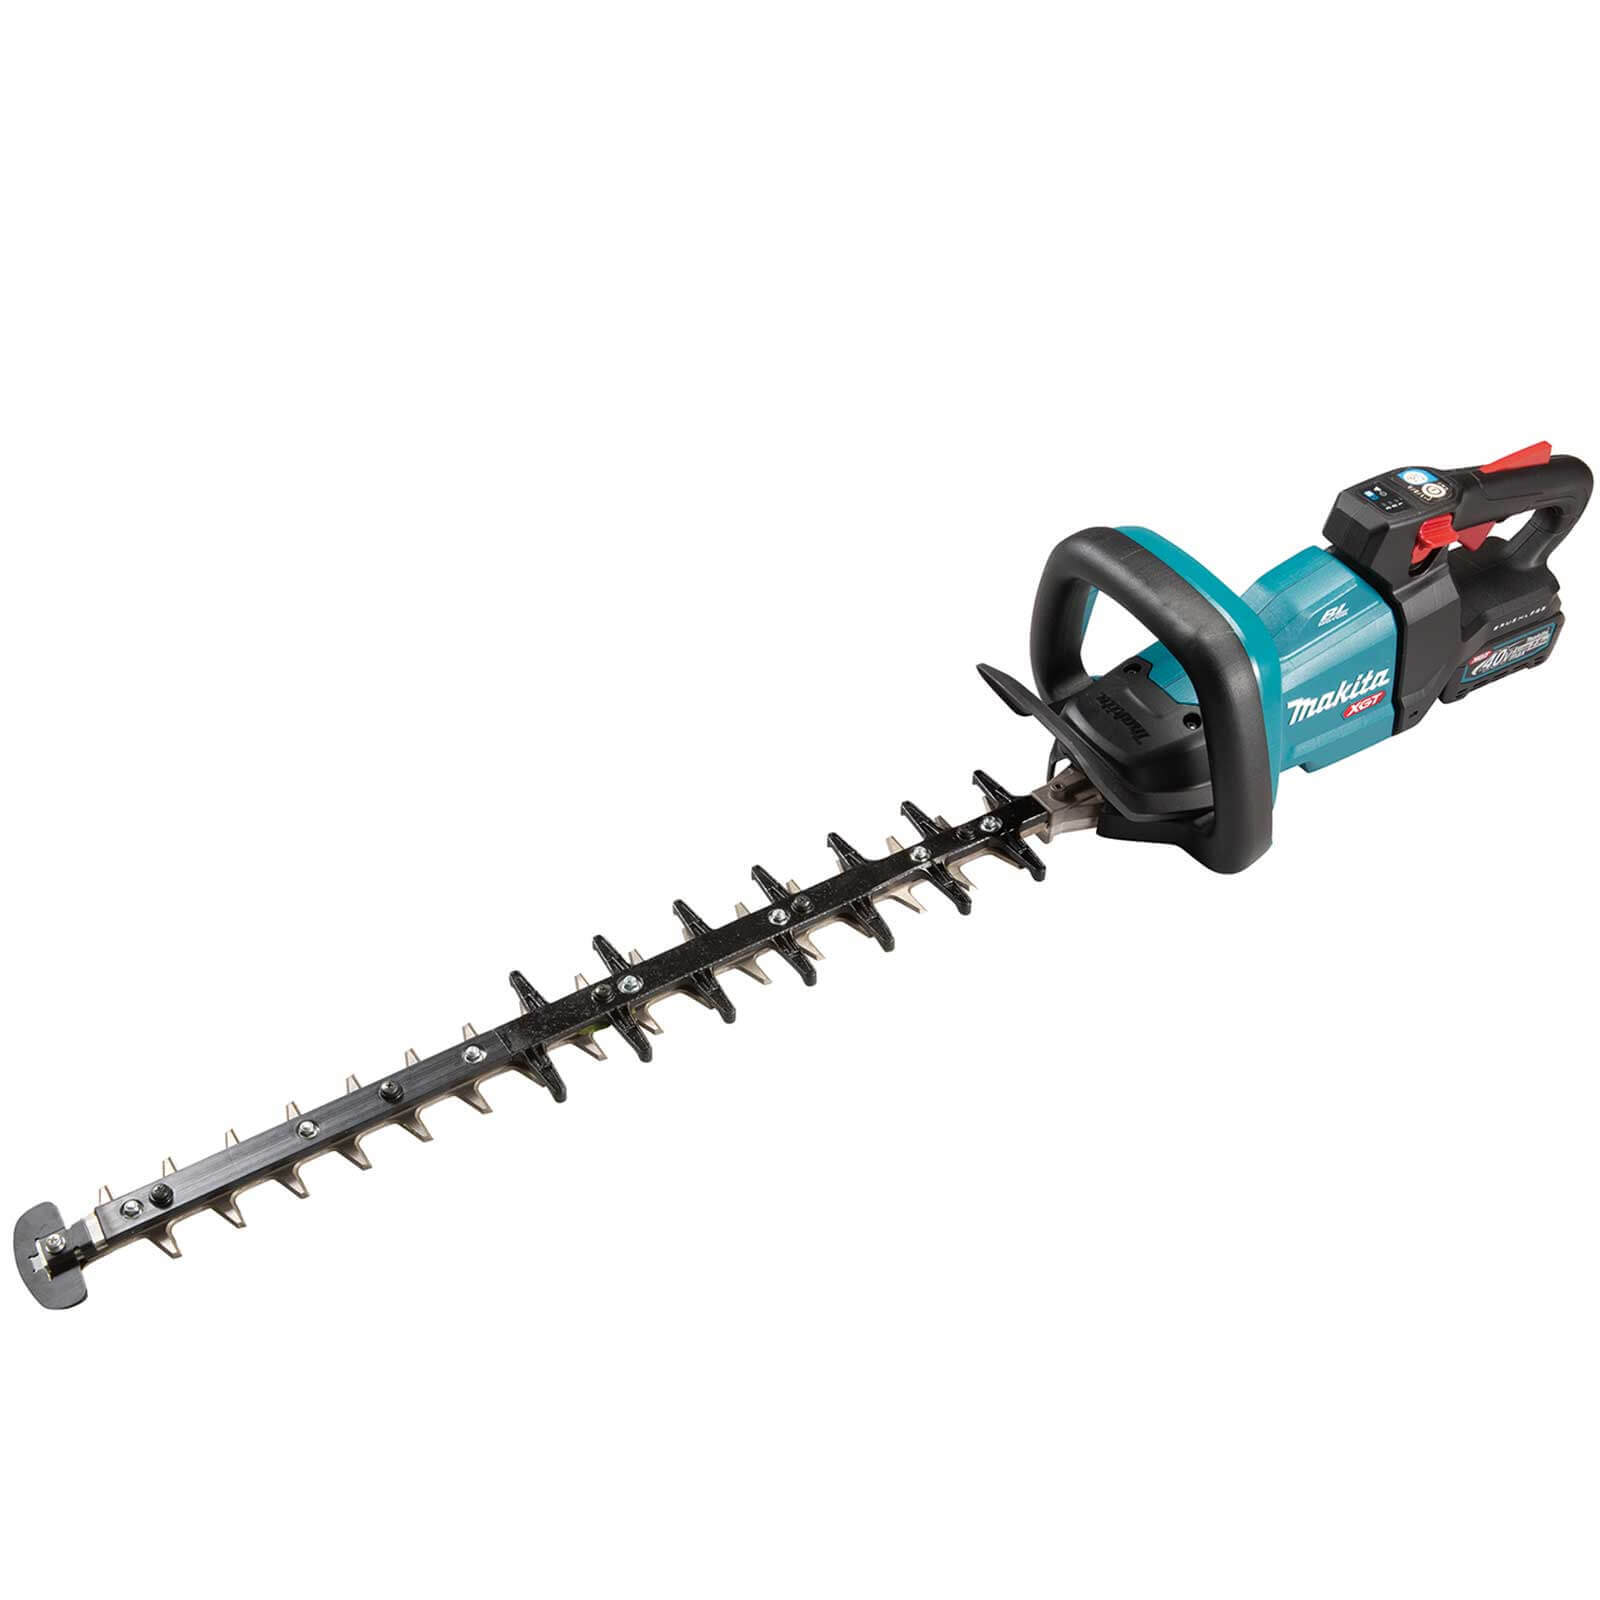 Photo of Makita Uh006g 40v Xgt 60cm Brushless Hedge Trimmer No Batteries No Charger